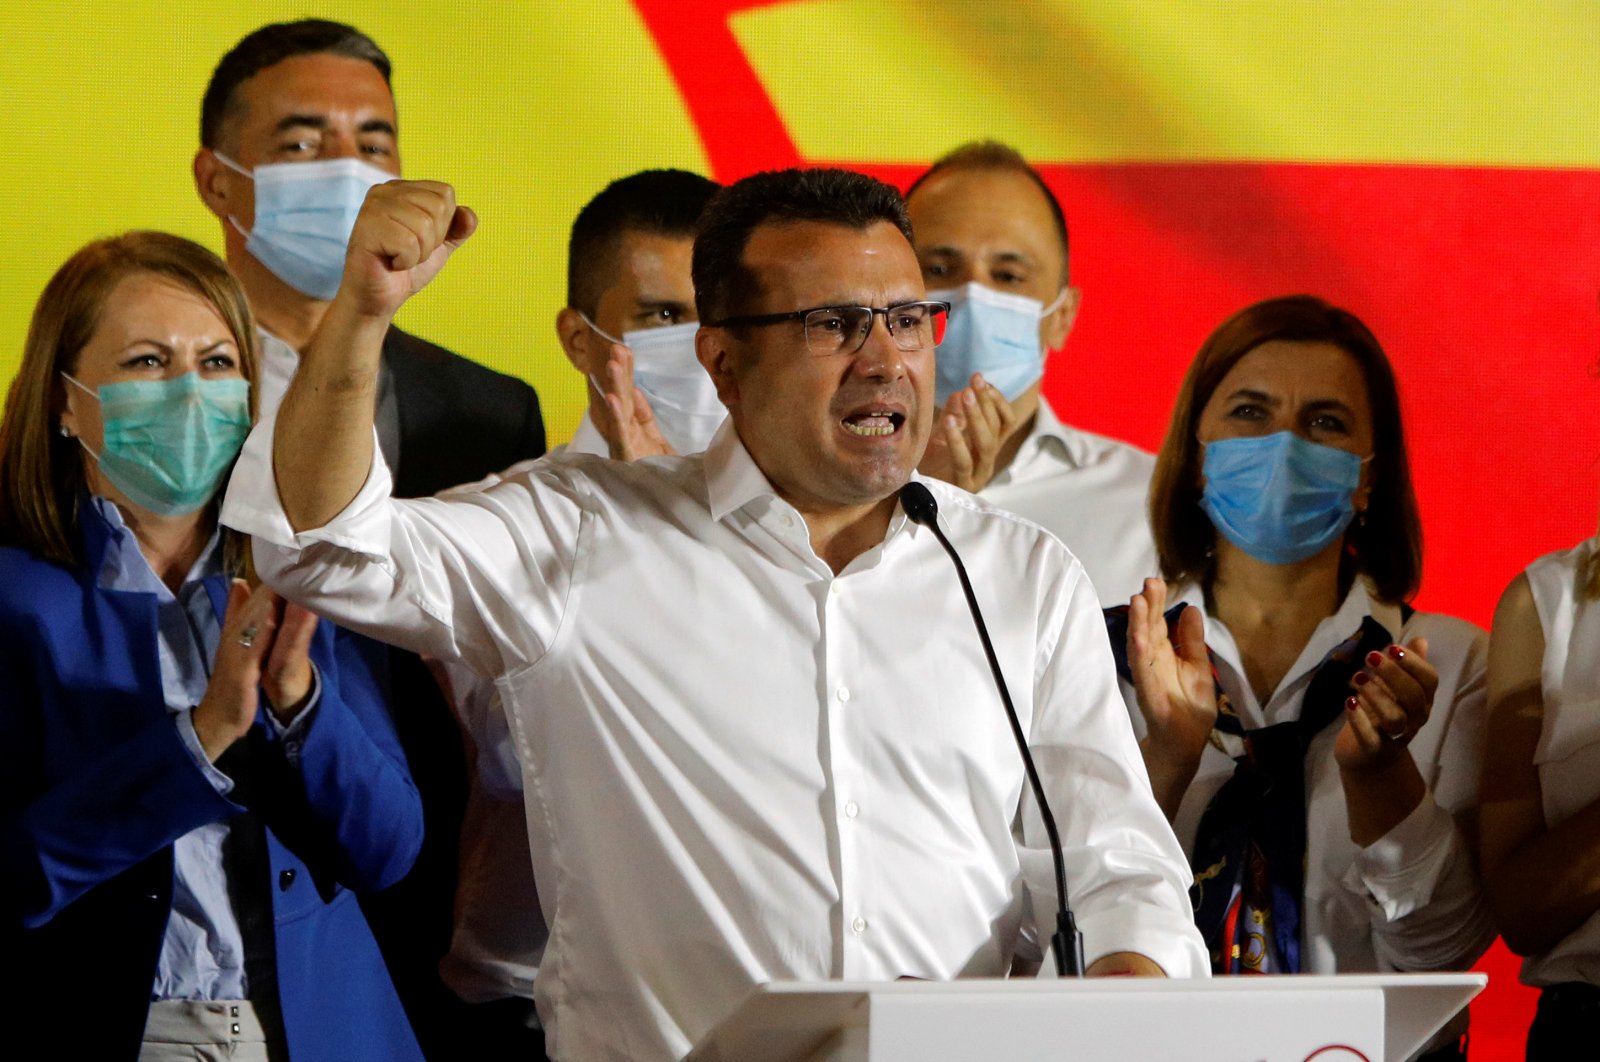 North Macedonia's former prime minister and leader of the ruling SDSM party Zoran Zaev celebrates his victory in a parliamentary election, Skopje, July 16, 2020. (REUTERS Photo)